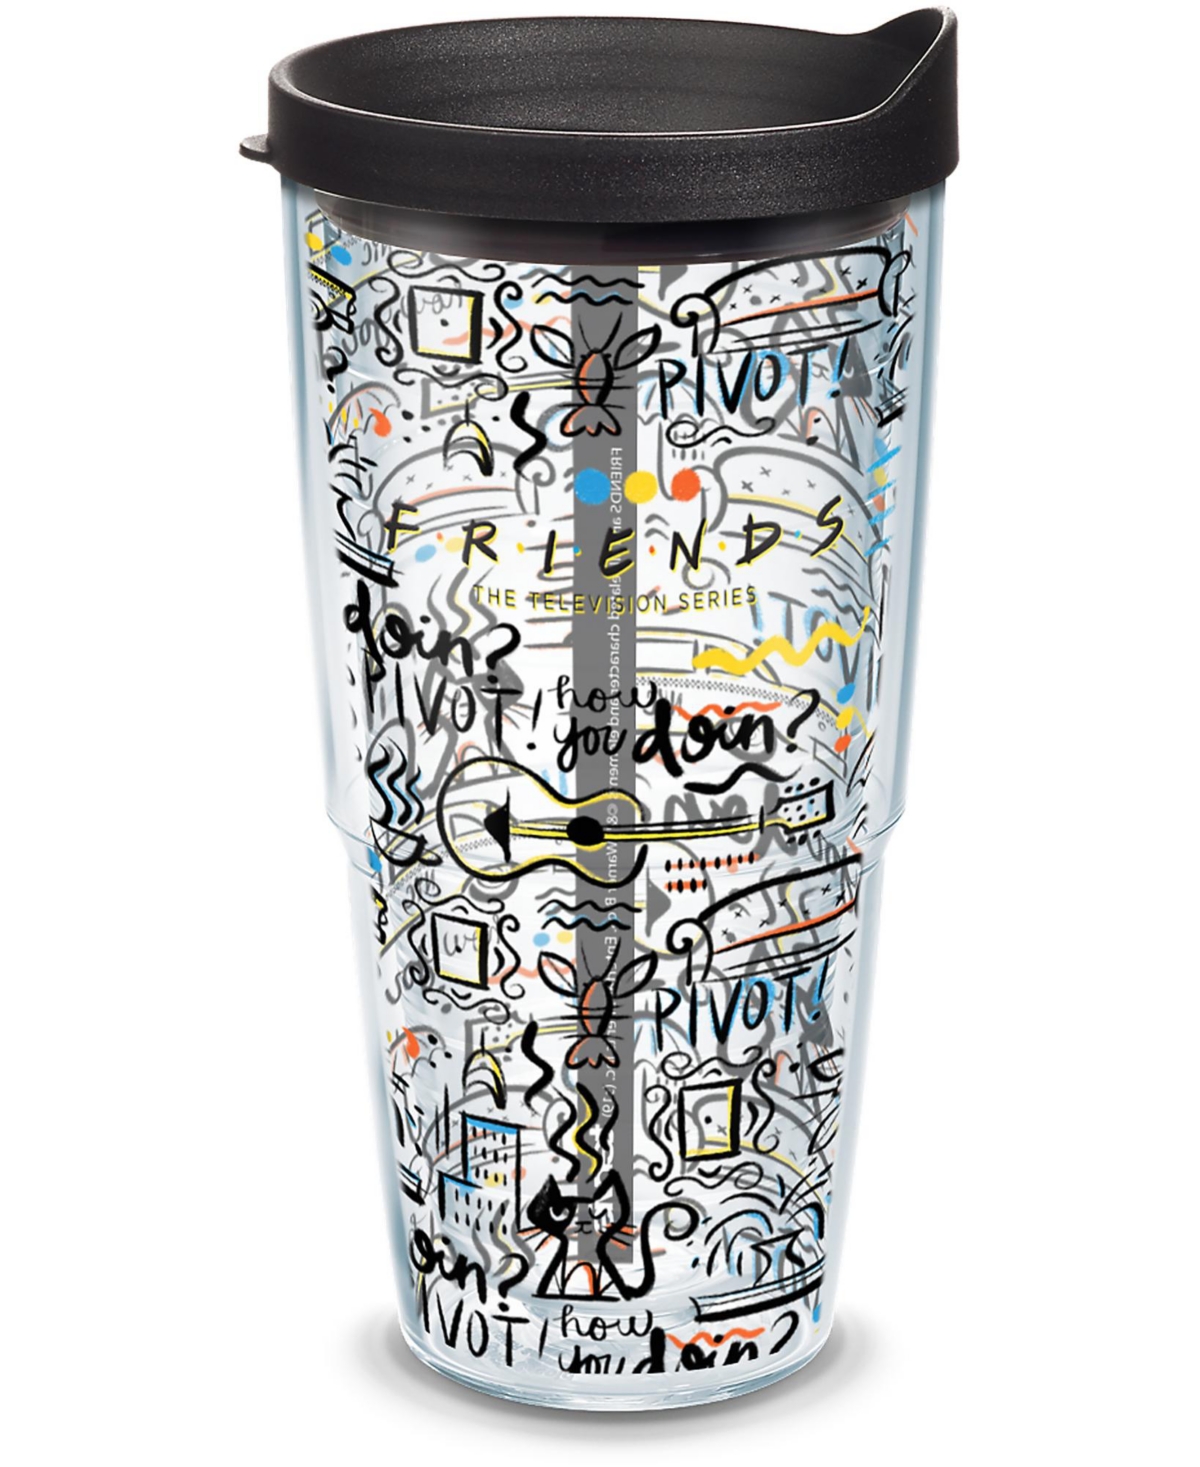 Tervis Tumbler Tervis Friends Pattern Made In Usa Double Walled Insulated Tumbler Travel Cup Keeps Drinks Cold & Ho In Open Miscellaneous